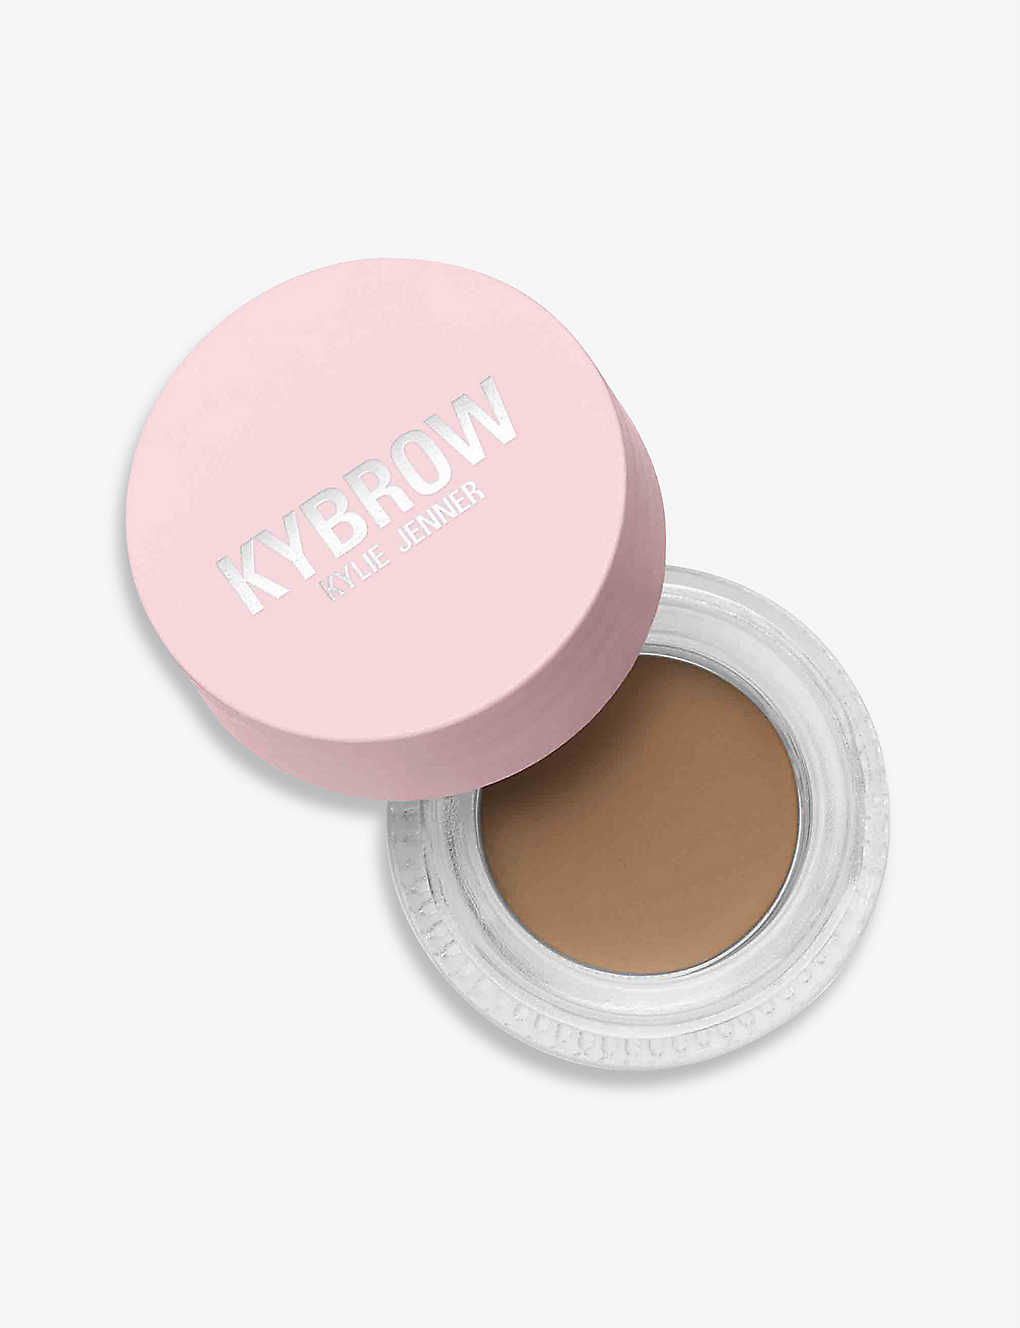 Kylie By Kylie Jenner Kybrow Brow Pomade 4.25g In Blonde 001